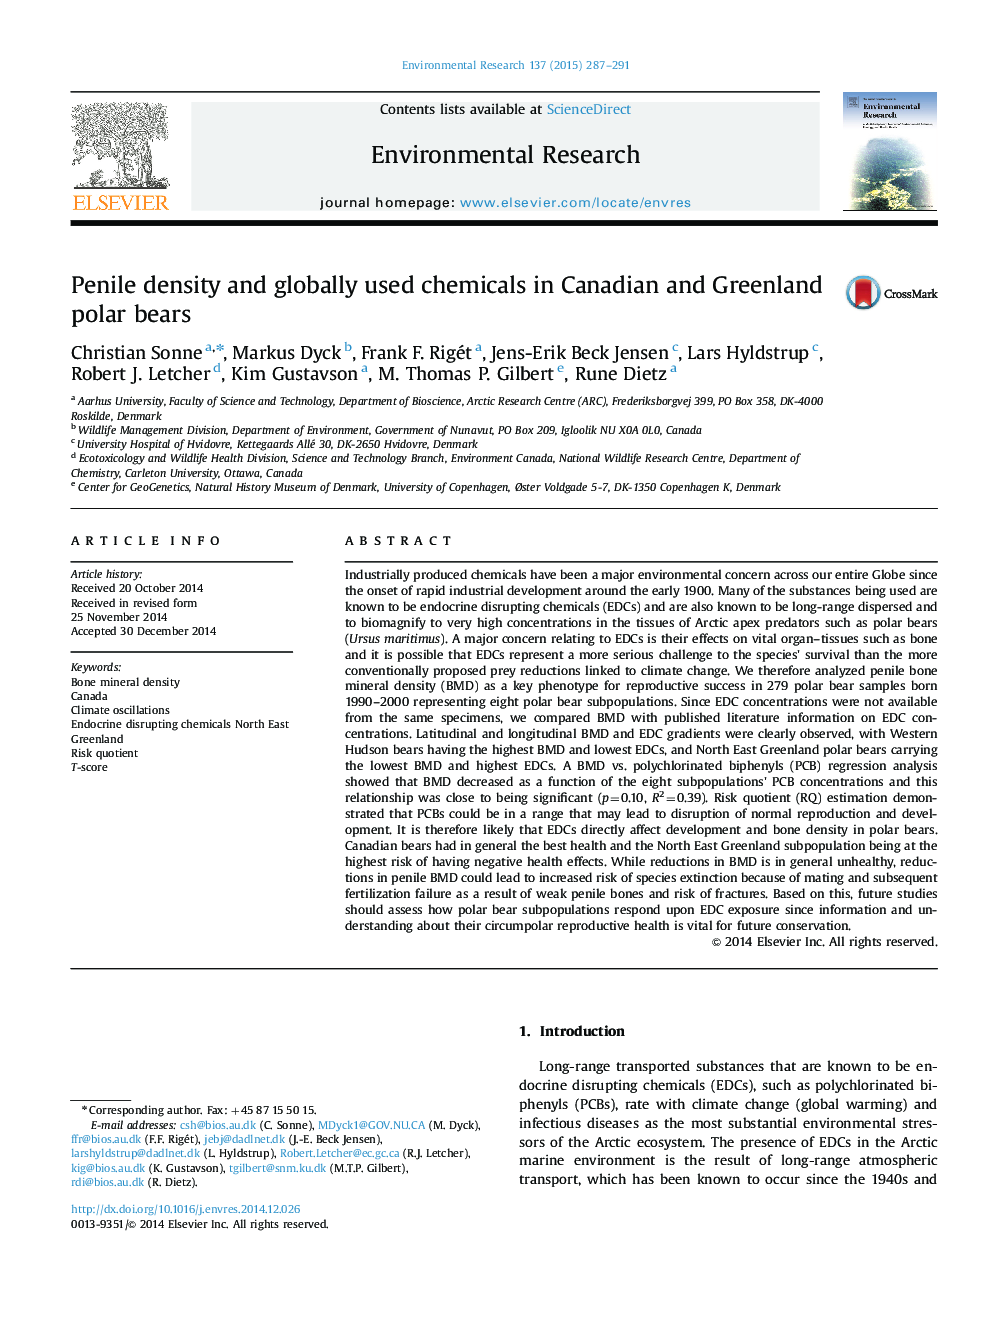 Penile density and globally used chemicals in Canadian and Greenland polar bears